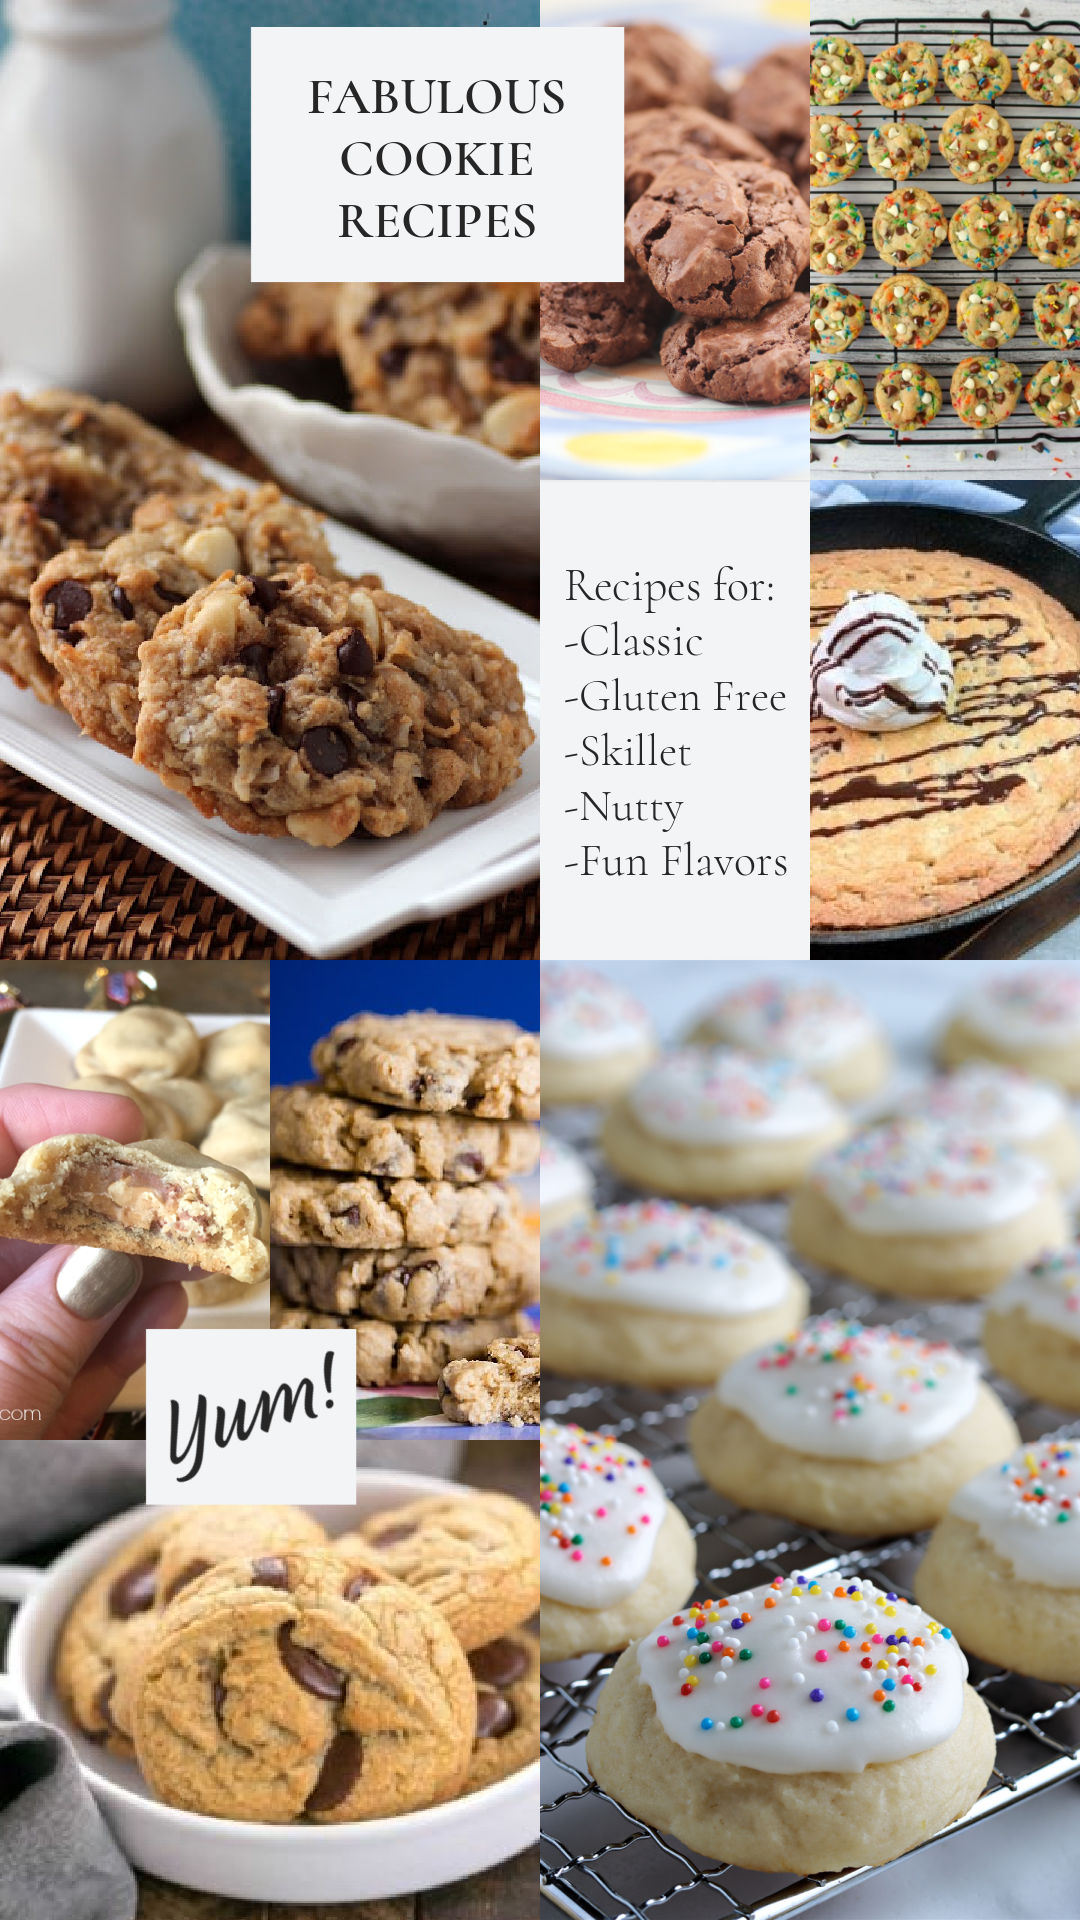 Fabulous Cookie Recipes that are perfect to bake for the family. Bring a batch of cookies to the bake sale, book club, or work potluck.